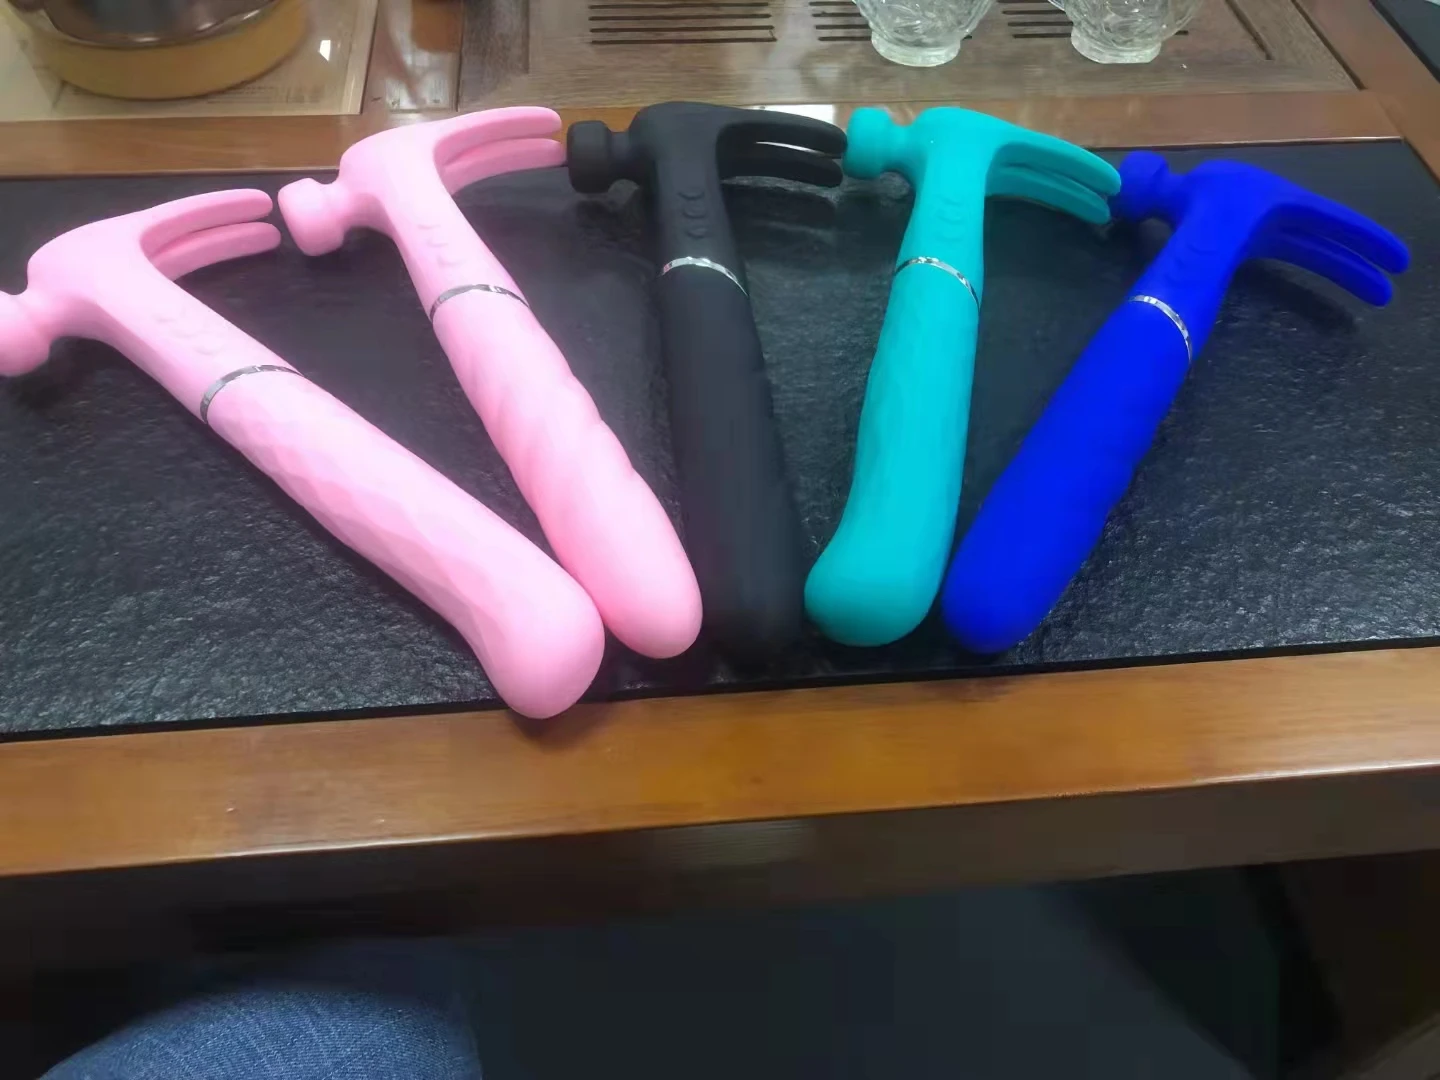 3 Speeds Usb Charge Electrical Sex Toys The Hammer Vibrator With High Quality Buy The Hammer